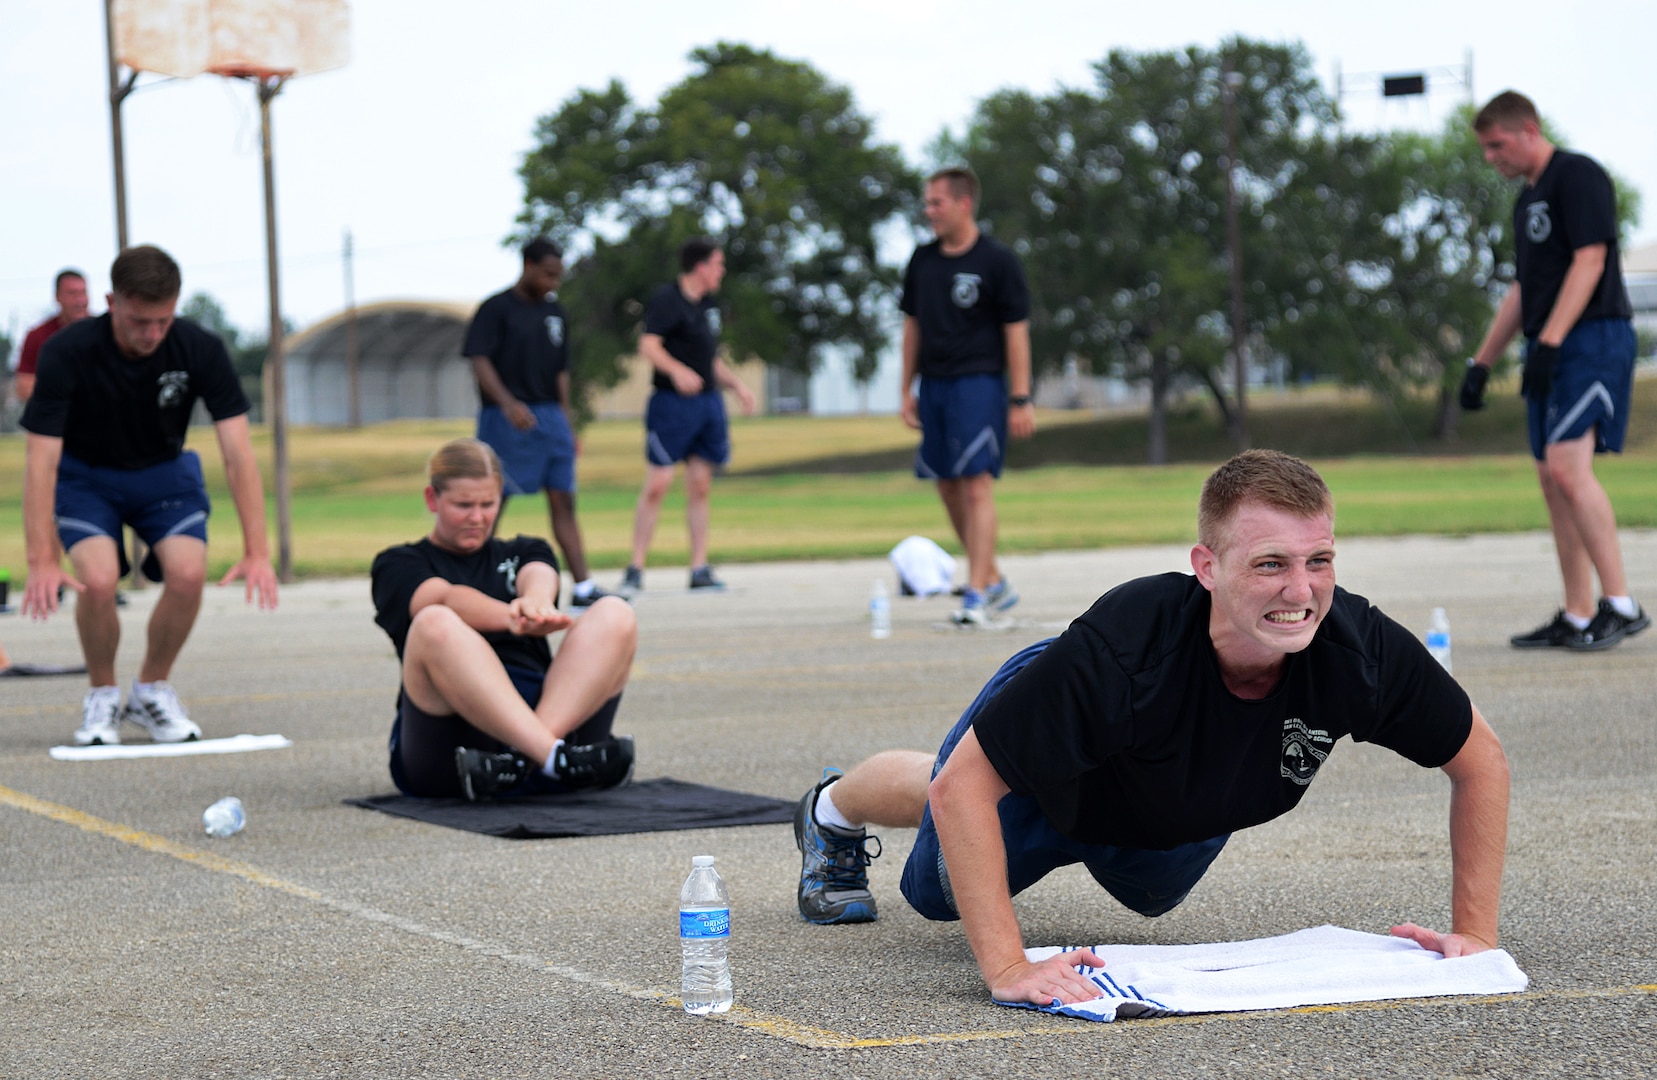 Senior Airman Douglas Turner, 959th Medical Group medical laboratory technician, takes part in a warrior workout session as part of the Airman Leadership School August 19, at Joint Base San Antonio-Lackland. (U.S. Air Force photo by Benjamin Faske/released)